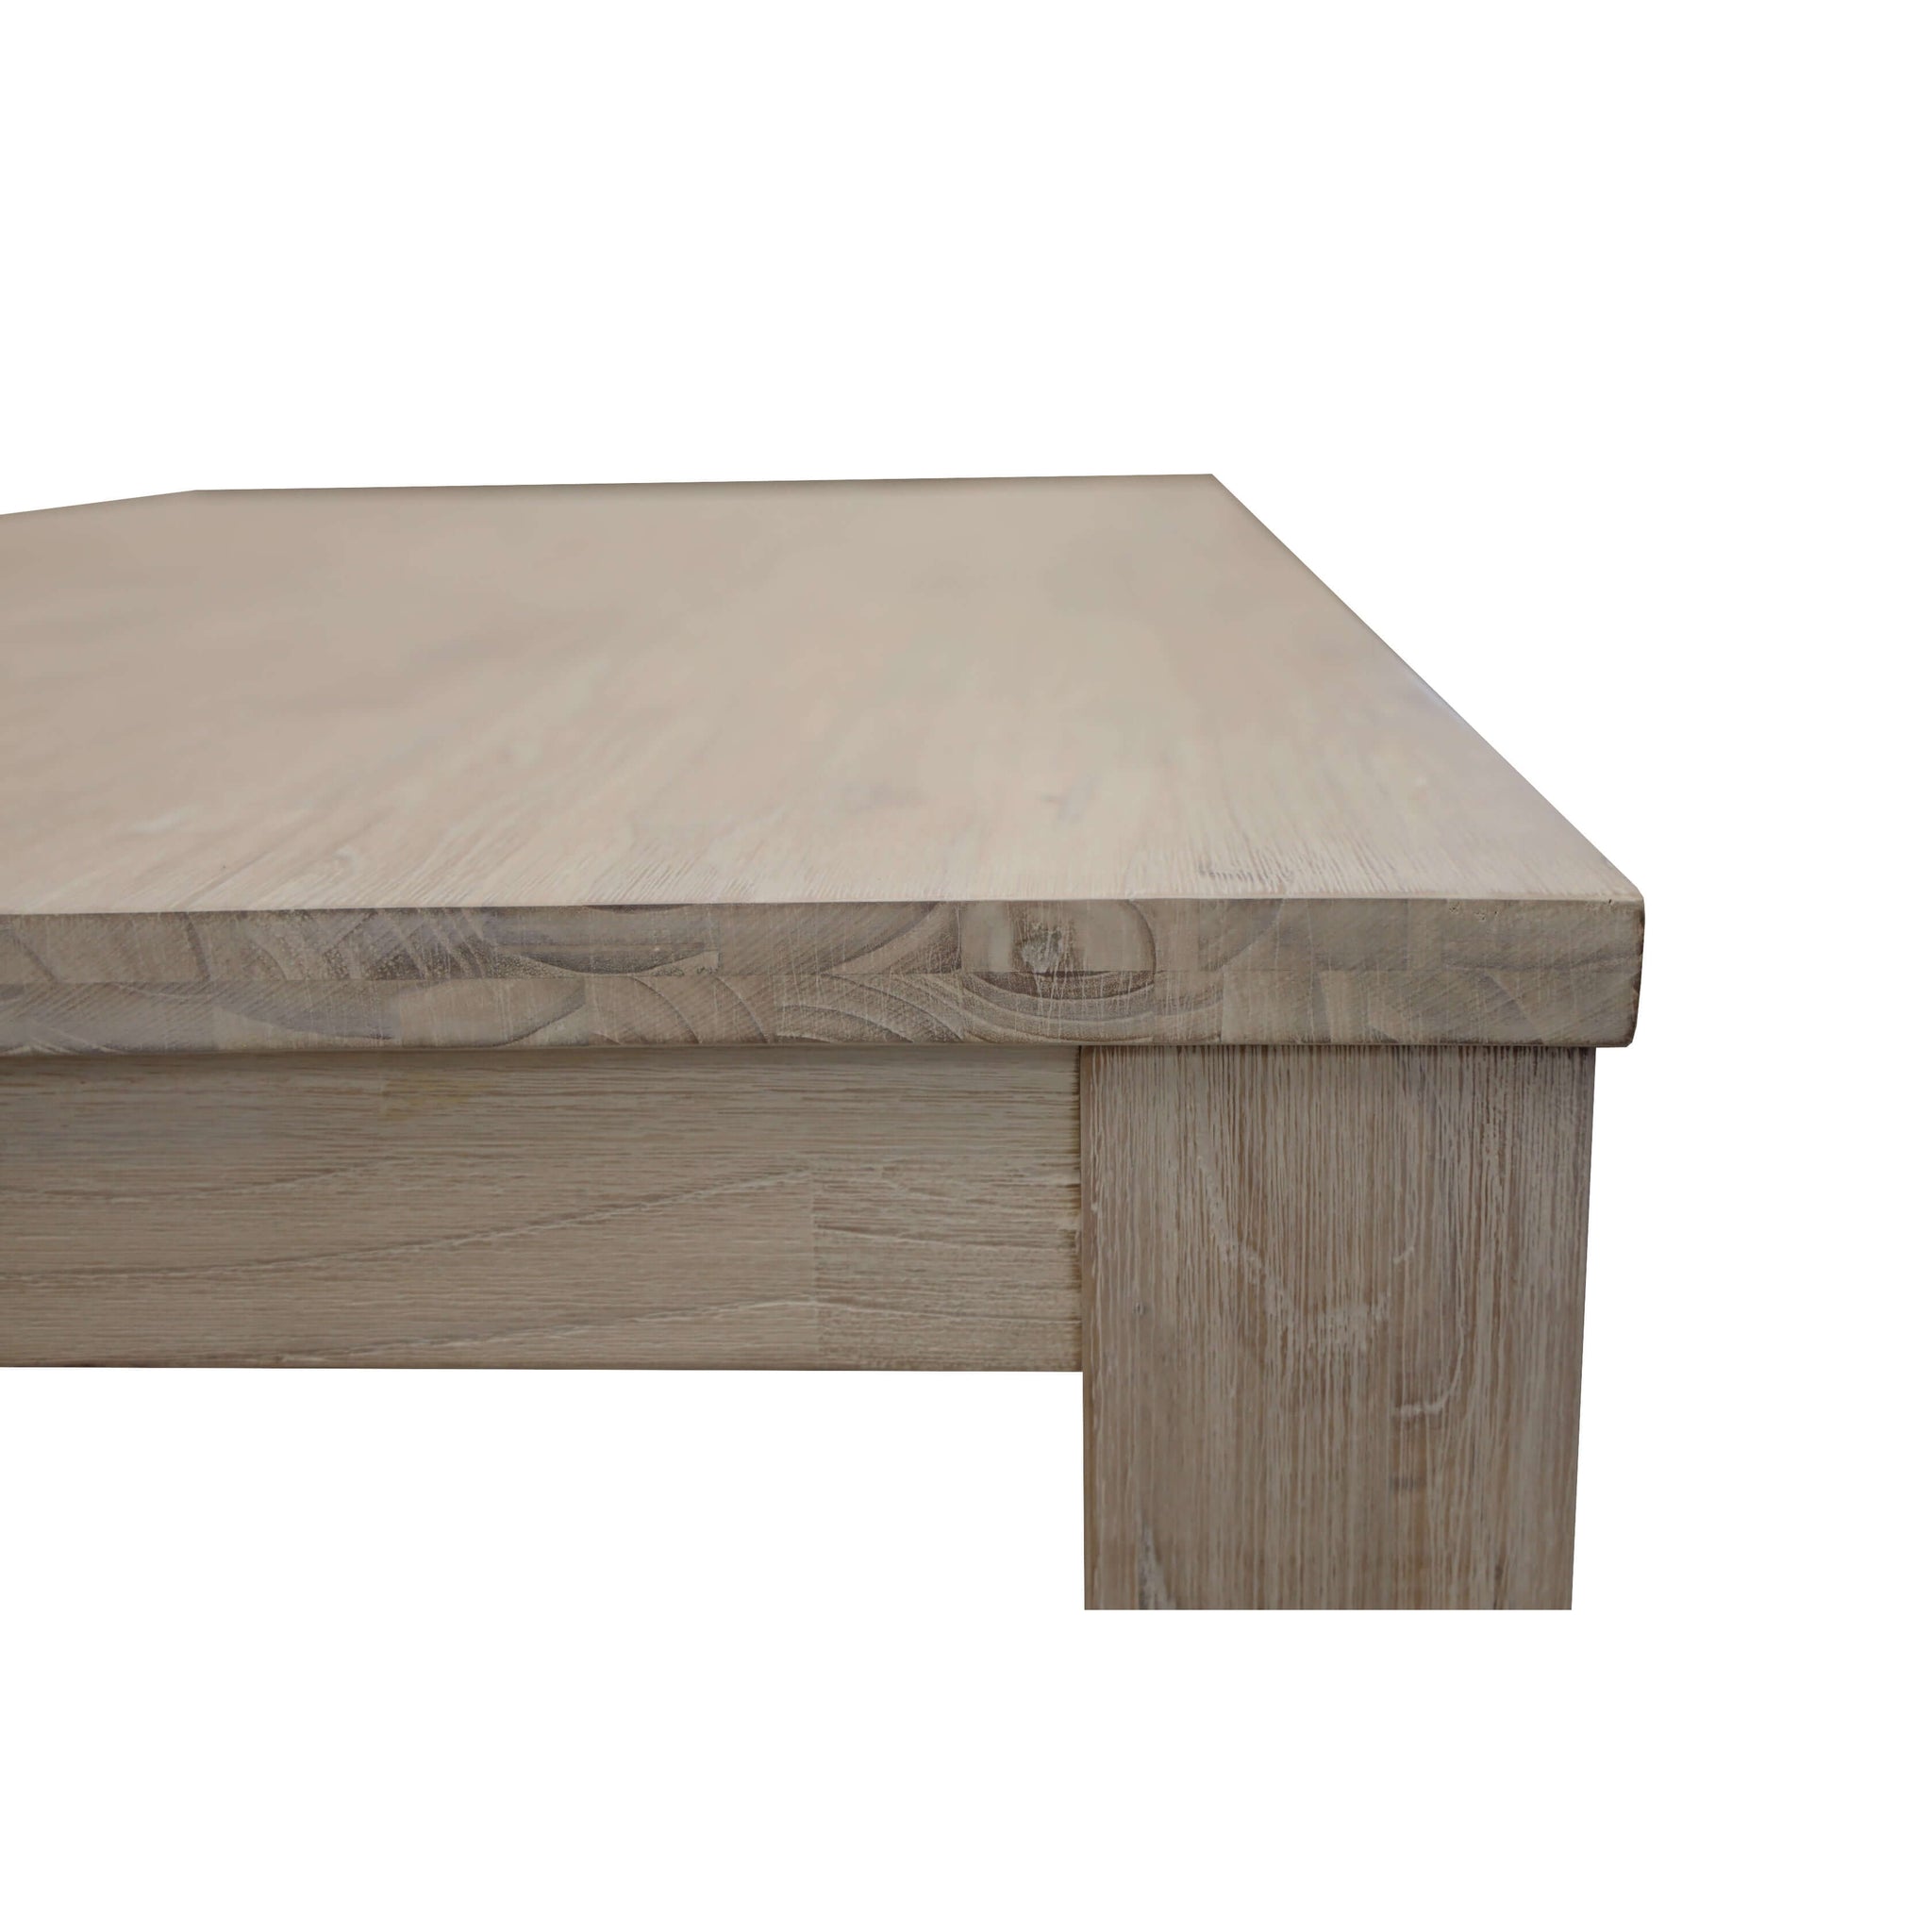 Foxglove Dining Table 190cm Solid Mt Ash Wood Home Dinner Furniture - White-Upinteriors